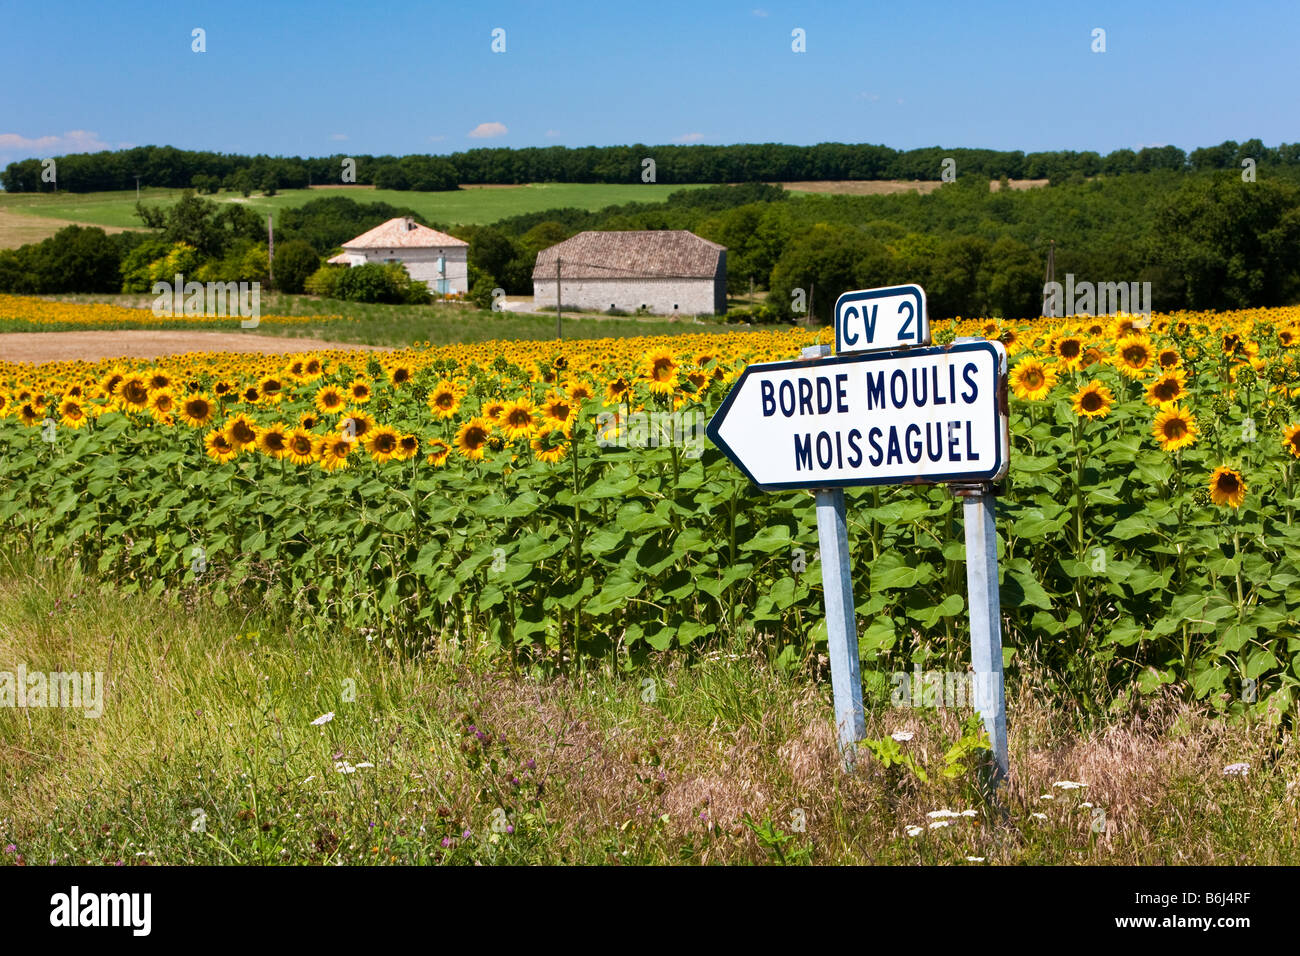 Countryside France - Ripe flowering sunflowers next to a rural French road sign in southwest France Europe in the summer season Stock Photo